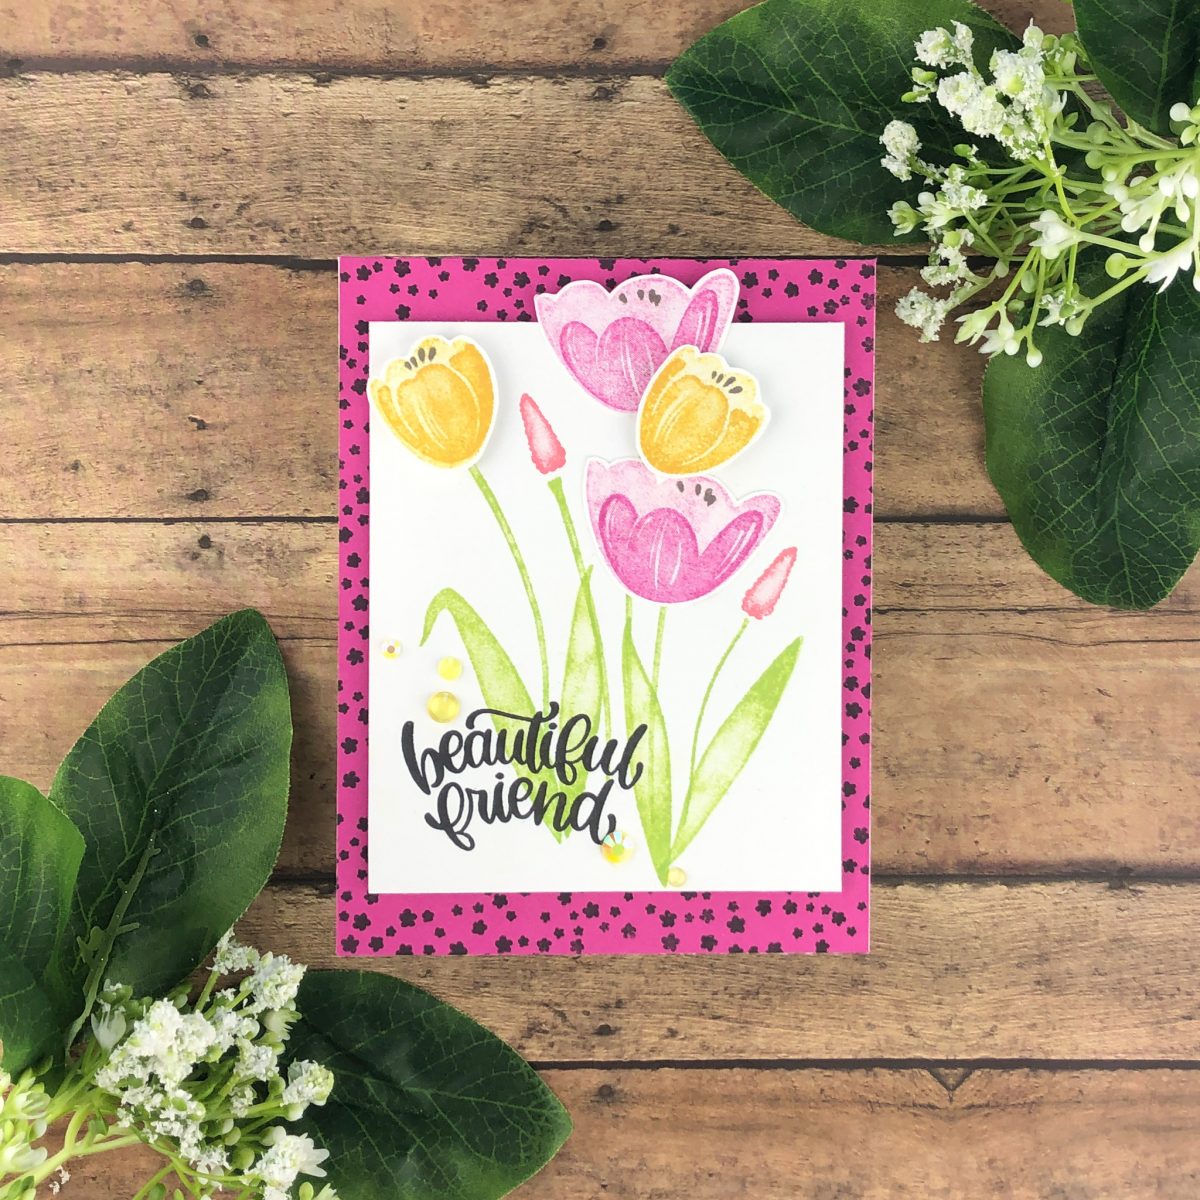 Color Challenge Card – Finding inspiration